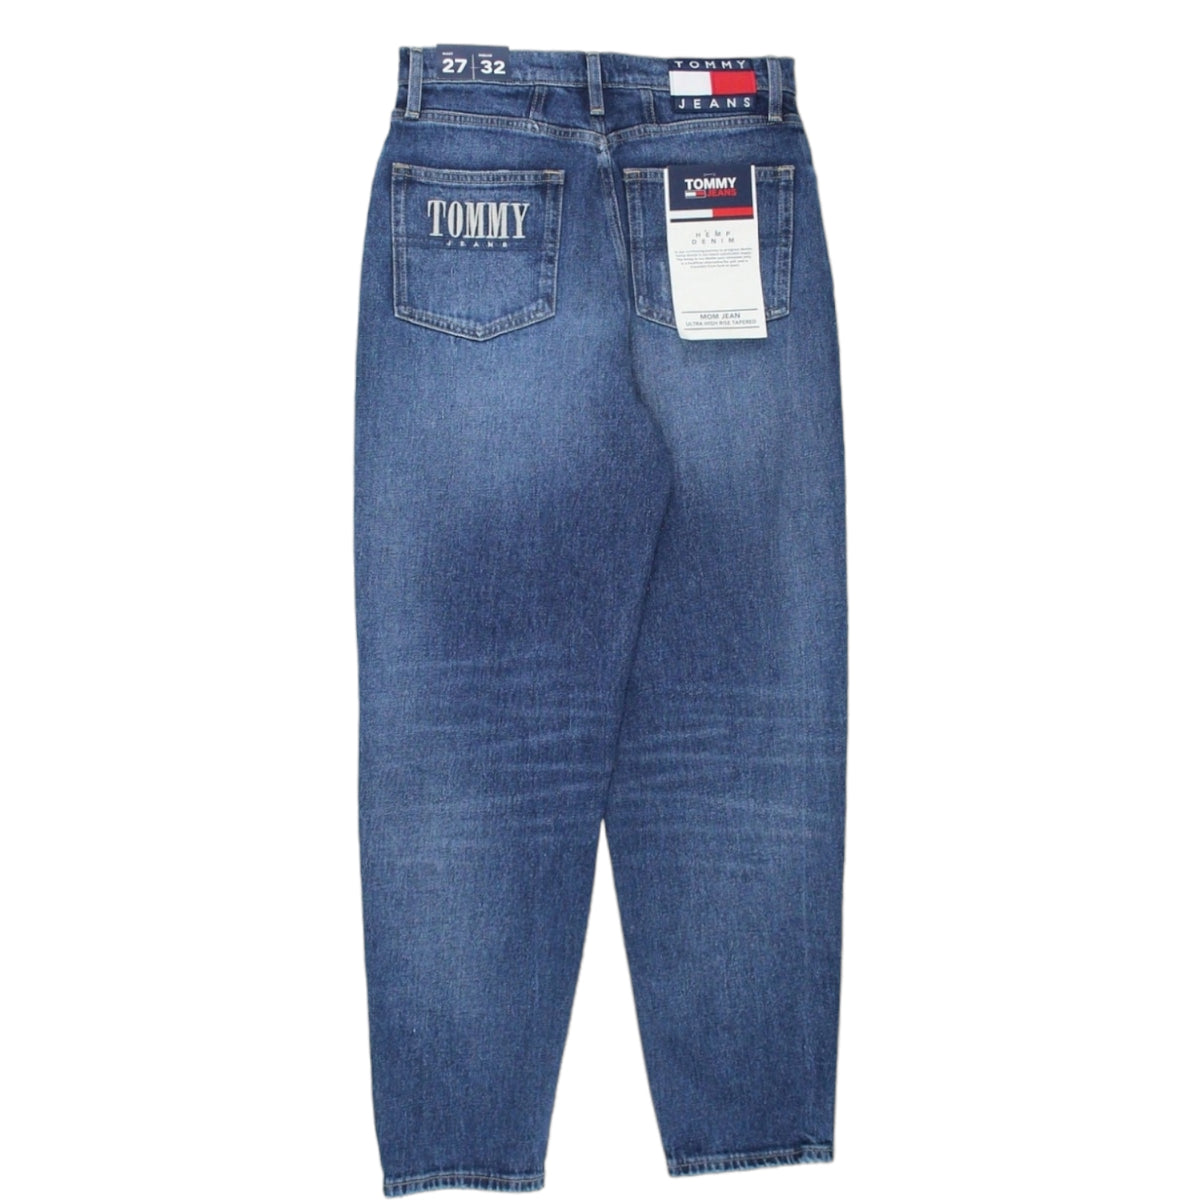 Tommy Jeans Denim Mom Jeans